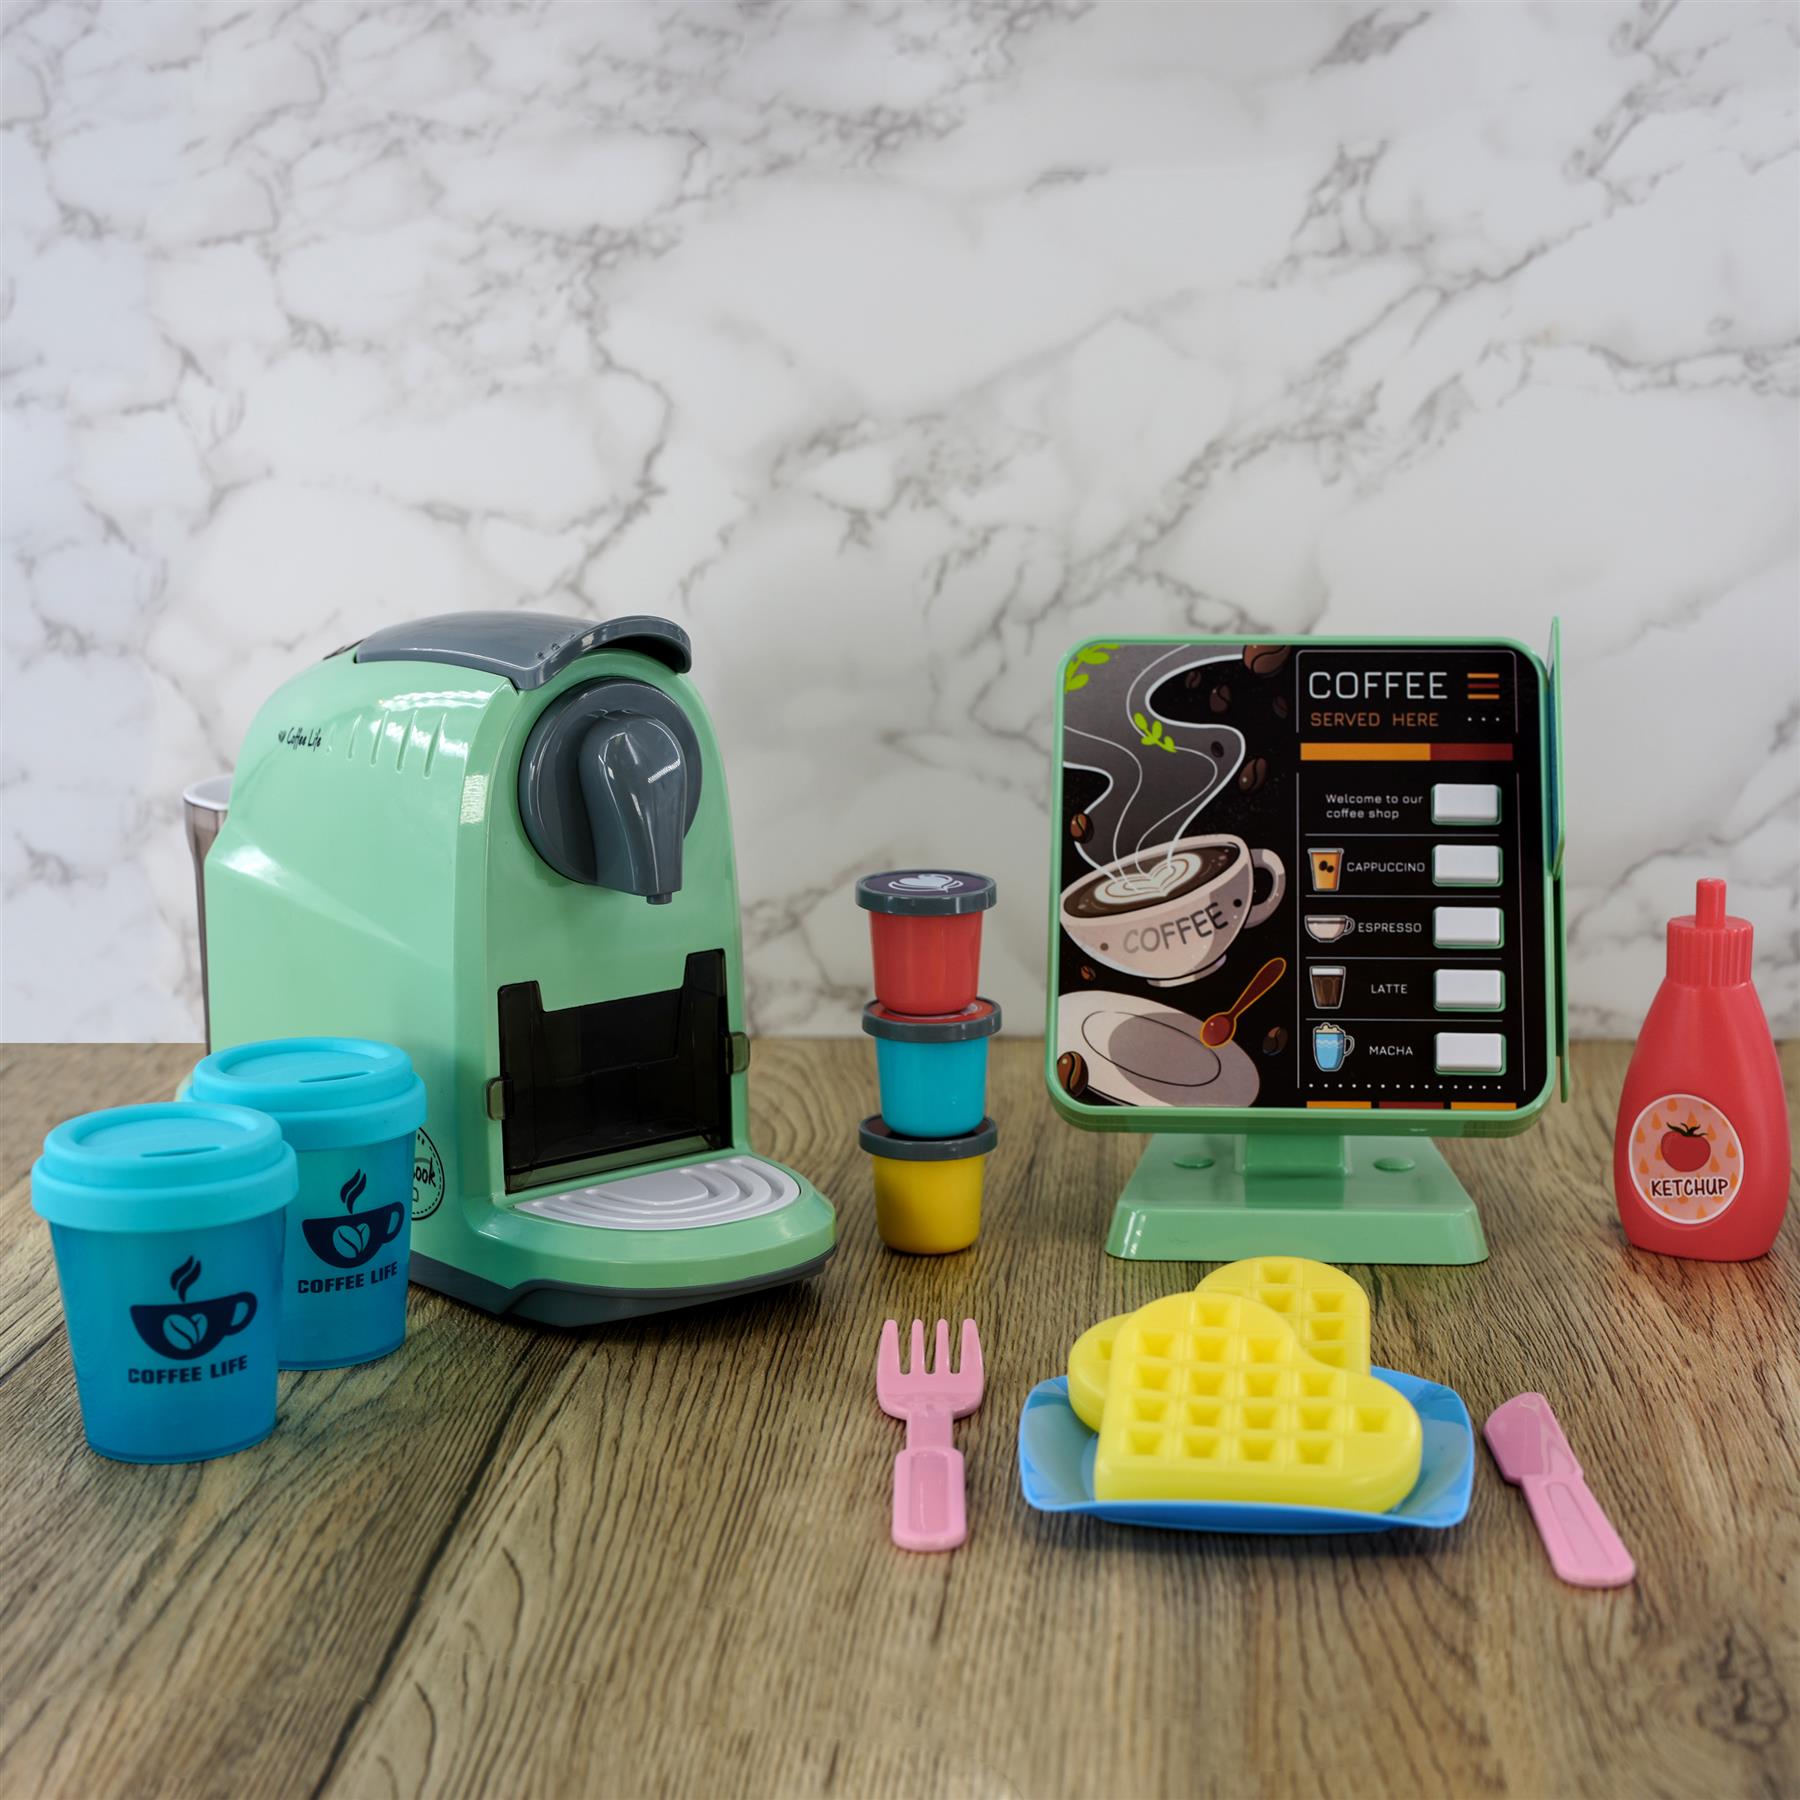 Kids Coffee Maker Machine Toy Kitchen Role Play Set with Cash Register Play Food by The Magic Toy Shop - UKBuyZone